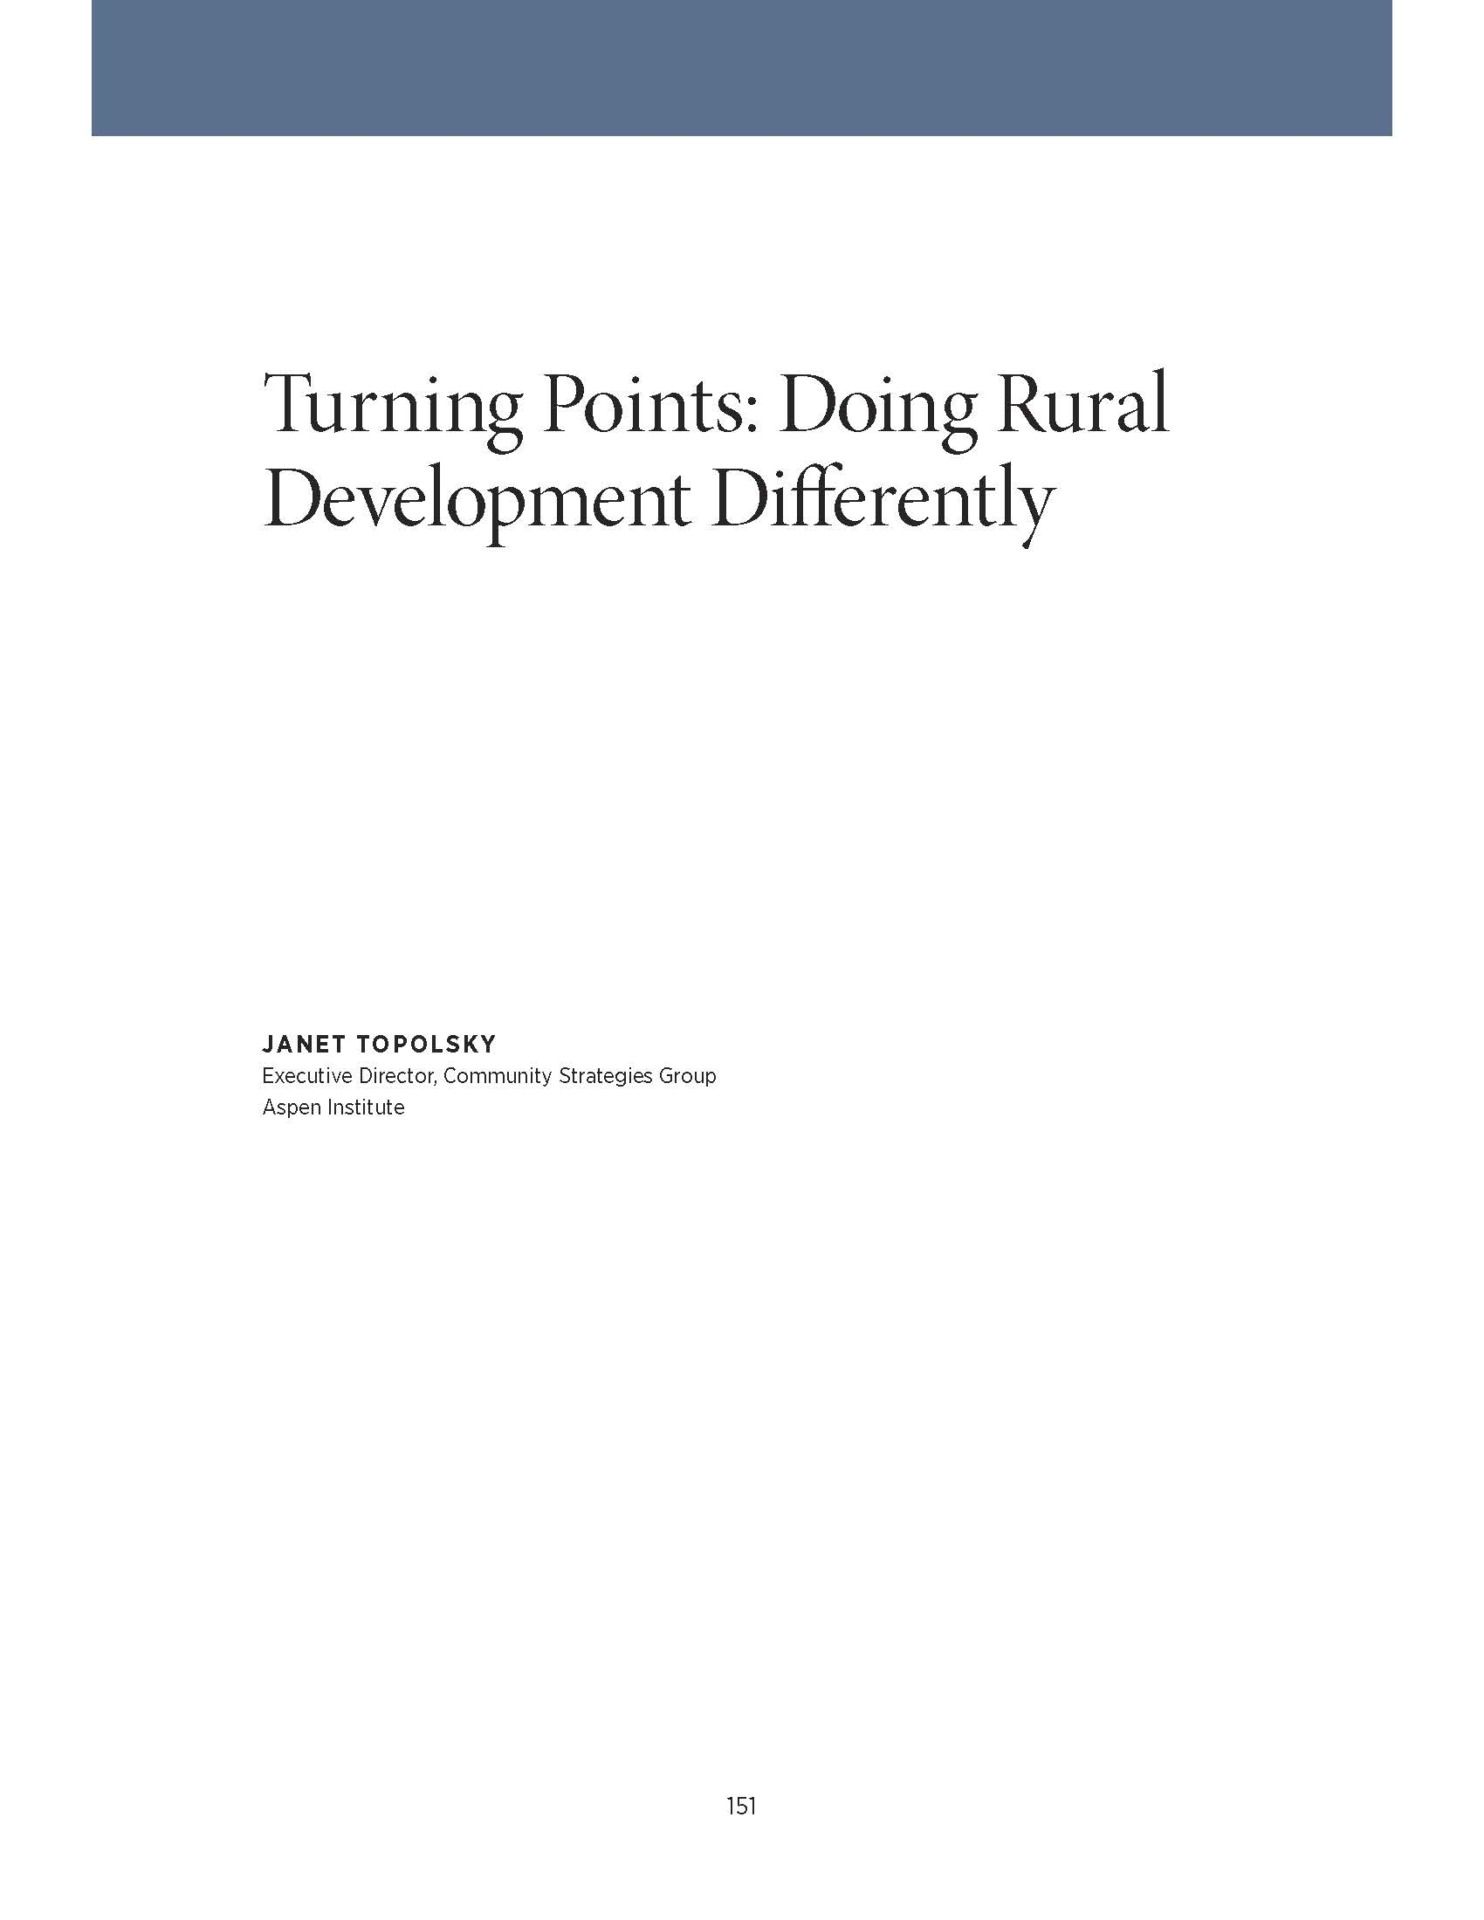 Turning Points: Doing Rural Development Differently report cover